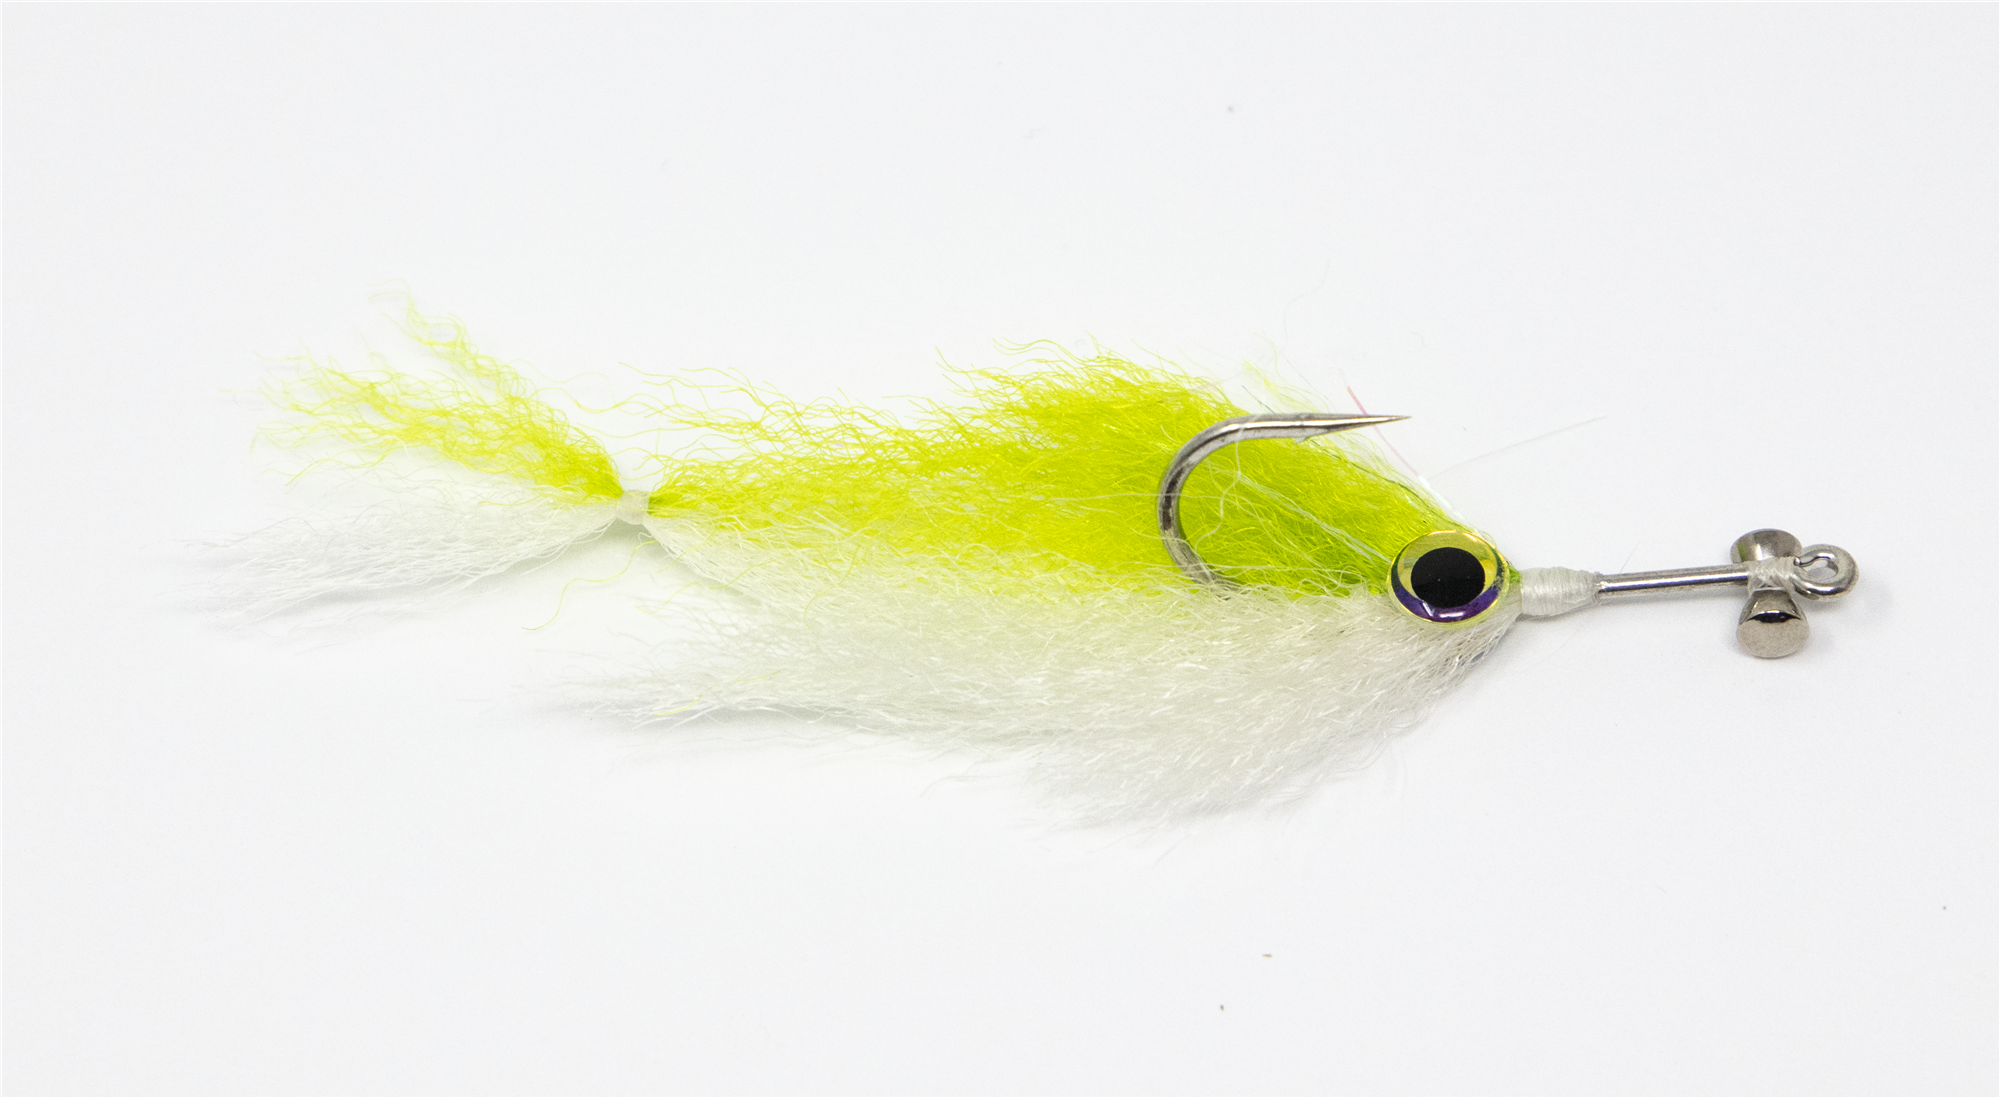 Satkowski's Drop Dead fly pattern is tied to imitate dying fish struggling to swim.